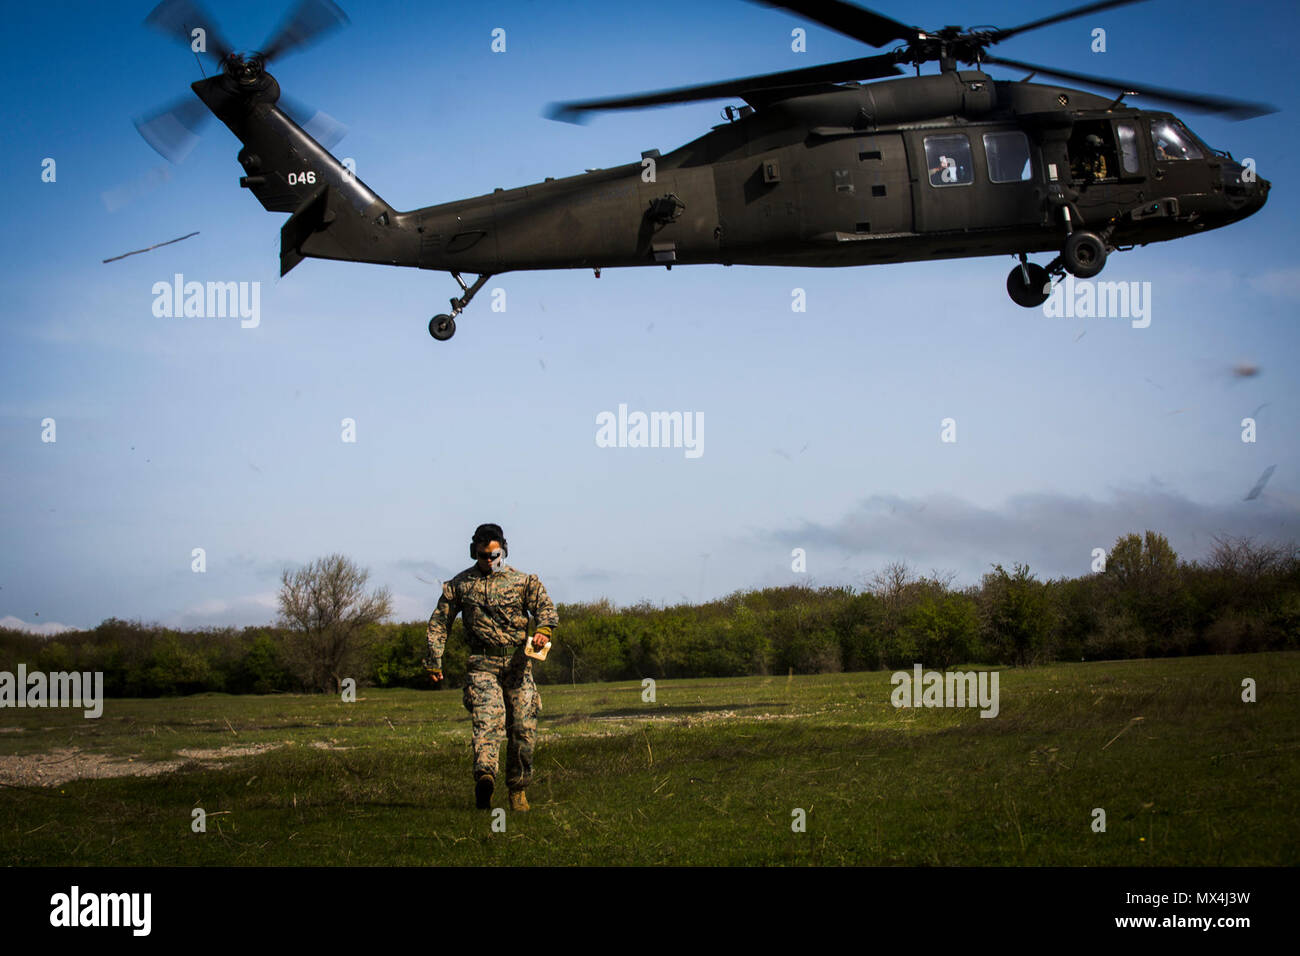 U.S. Marine Sgt. Viktor Cadiente, a forward observer with Black Sea Rotational Force 17.1, calls in the landing of a U.S. Army UH-60 Blackhawk helicopter during Exercise Platinum Eagle 17.2 at Babadag Training Area, Romania, April 30, 2017. Marines with BSRF and Marine Rotational Force Europe 17.1 held a class with Montenegrin soldiers over landing helicopters for casualty evacuations to improve on skills and interoperability. Partnerships formed from multinational exercises like this, and military-to-military training engagements are crucial in dealing with regional issues and keeping peace i Stock Photo